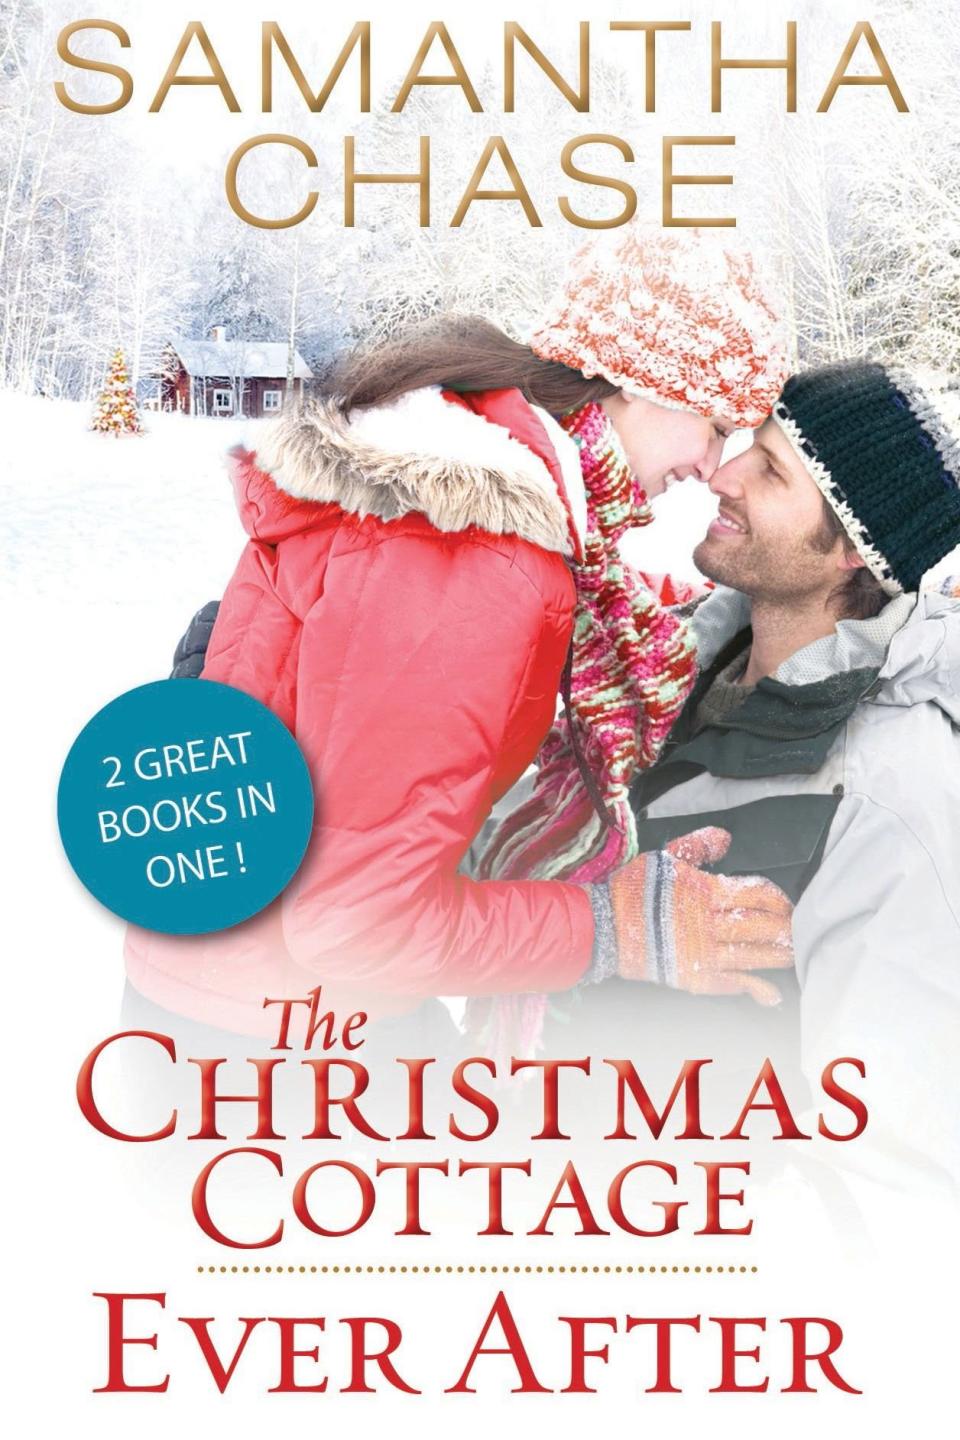 The Christmas Cottage by Samantha Chase